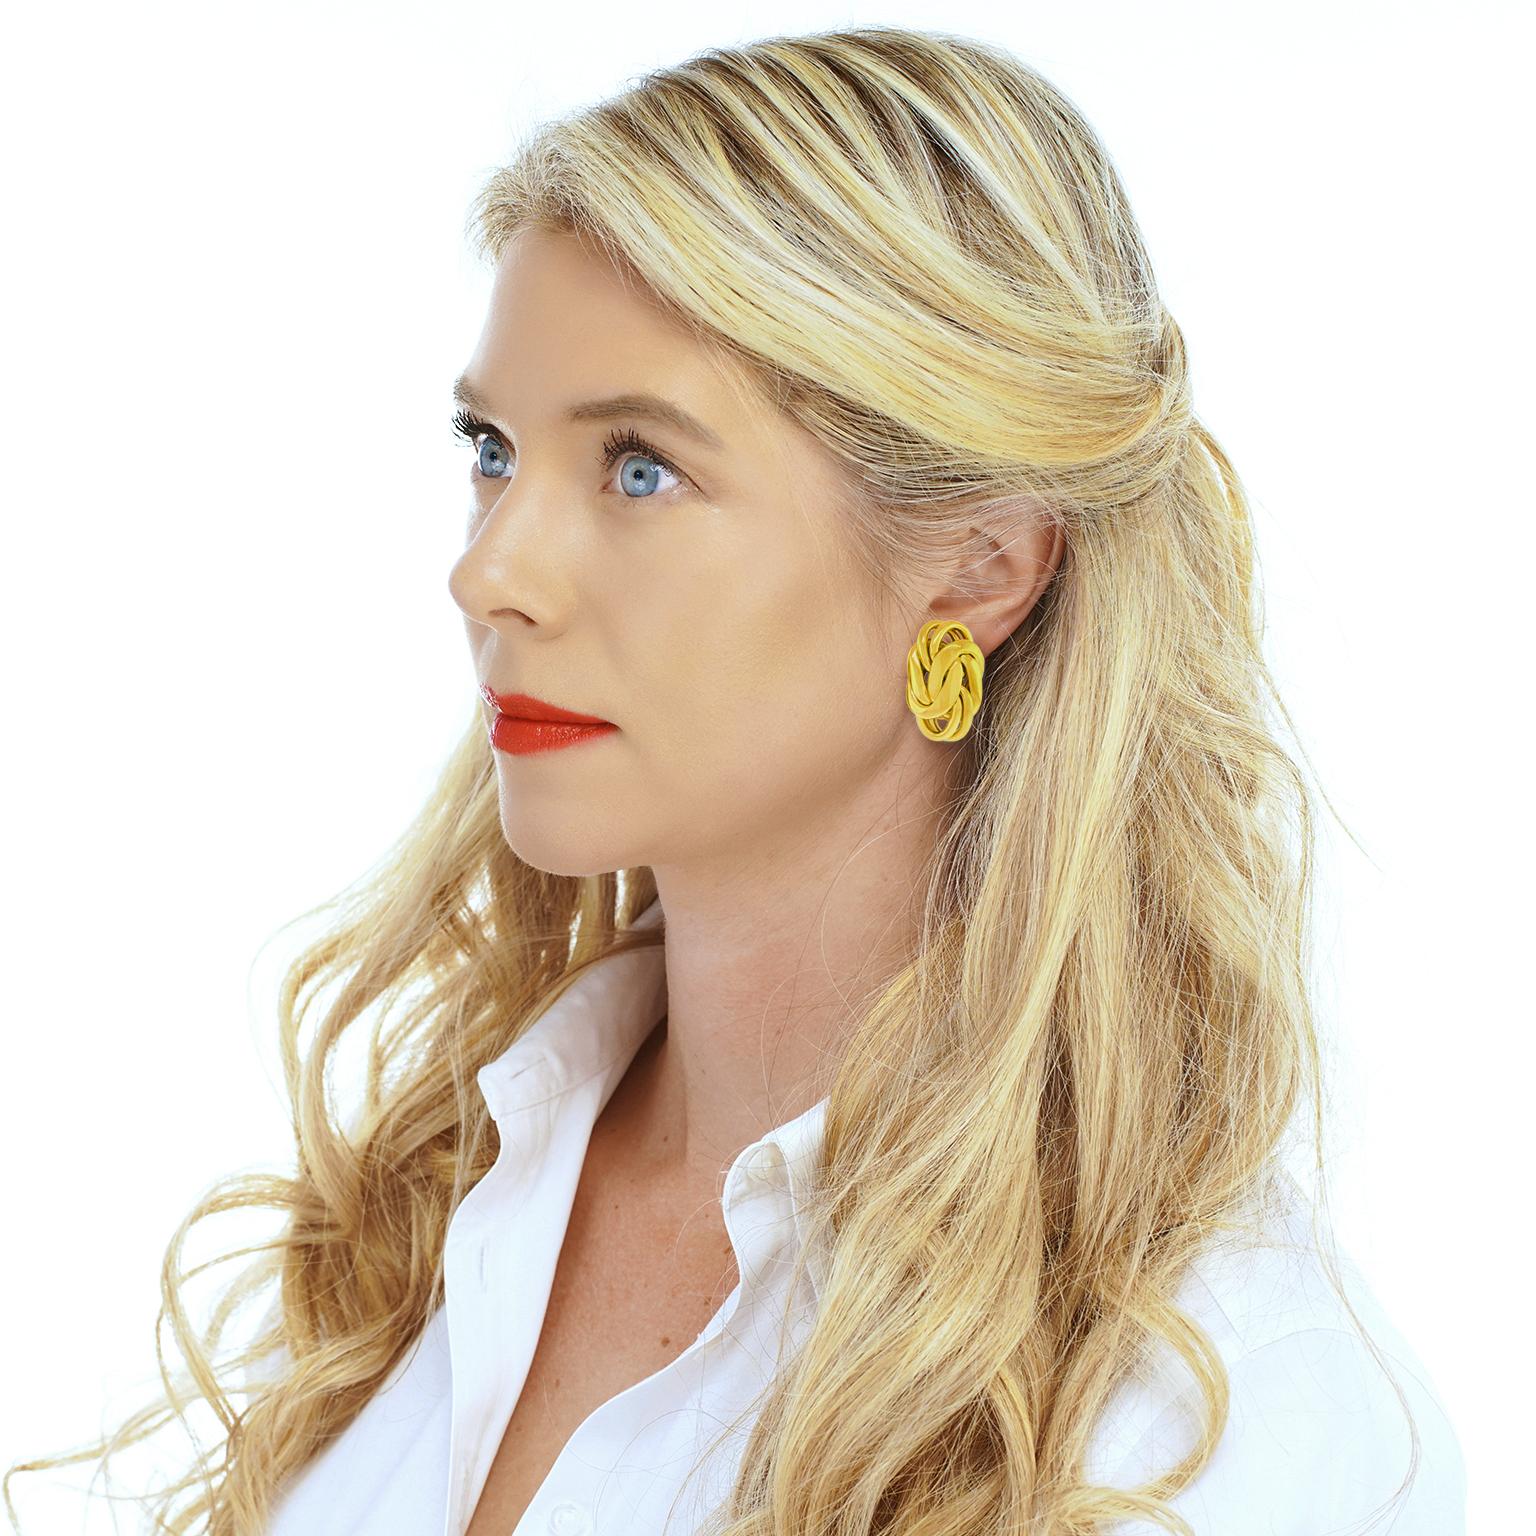 Circa 1960s, 18k, by Black Starr & Frost, New York. These gloriously chic yellow gold earrings by Black Star & Frost feature a Russian braid motif flawlessly complimented by a polished finish. Meticulously fabricated in eighteen-karat gold, they